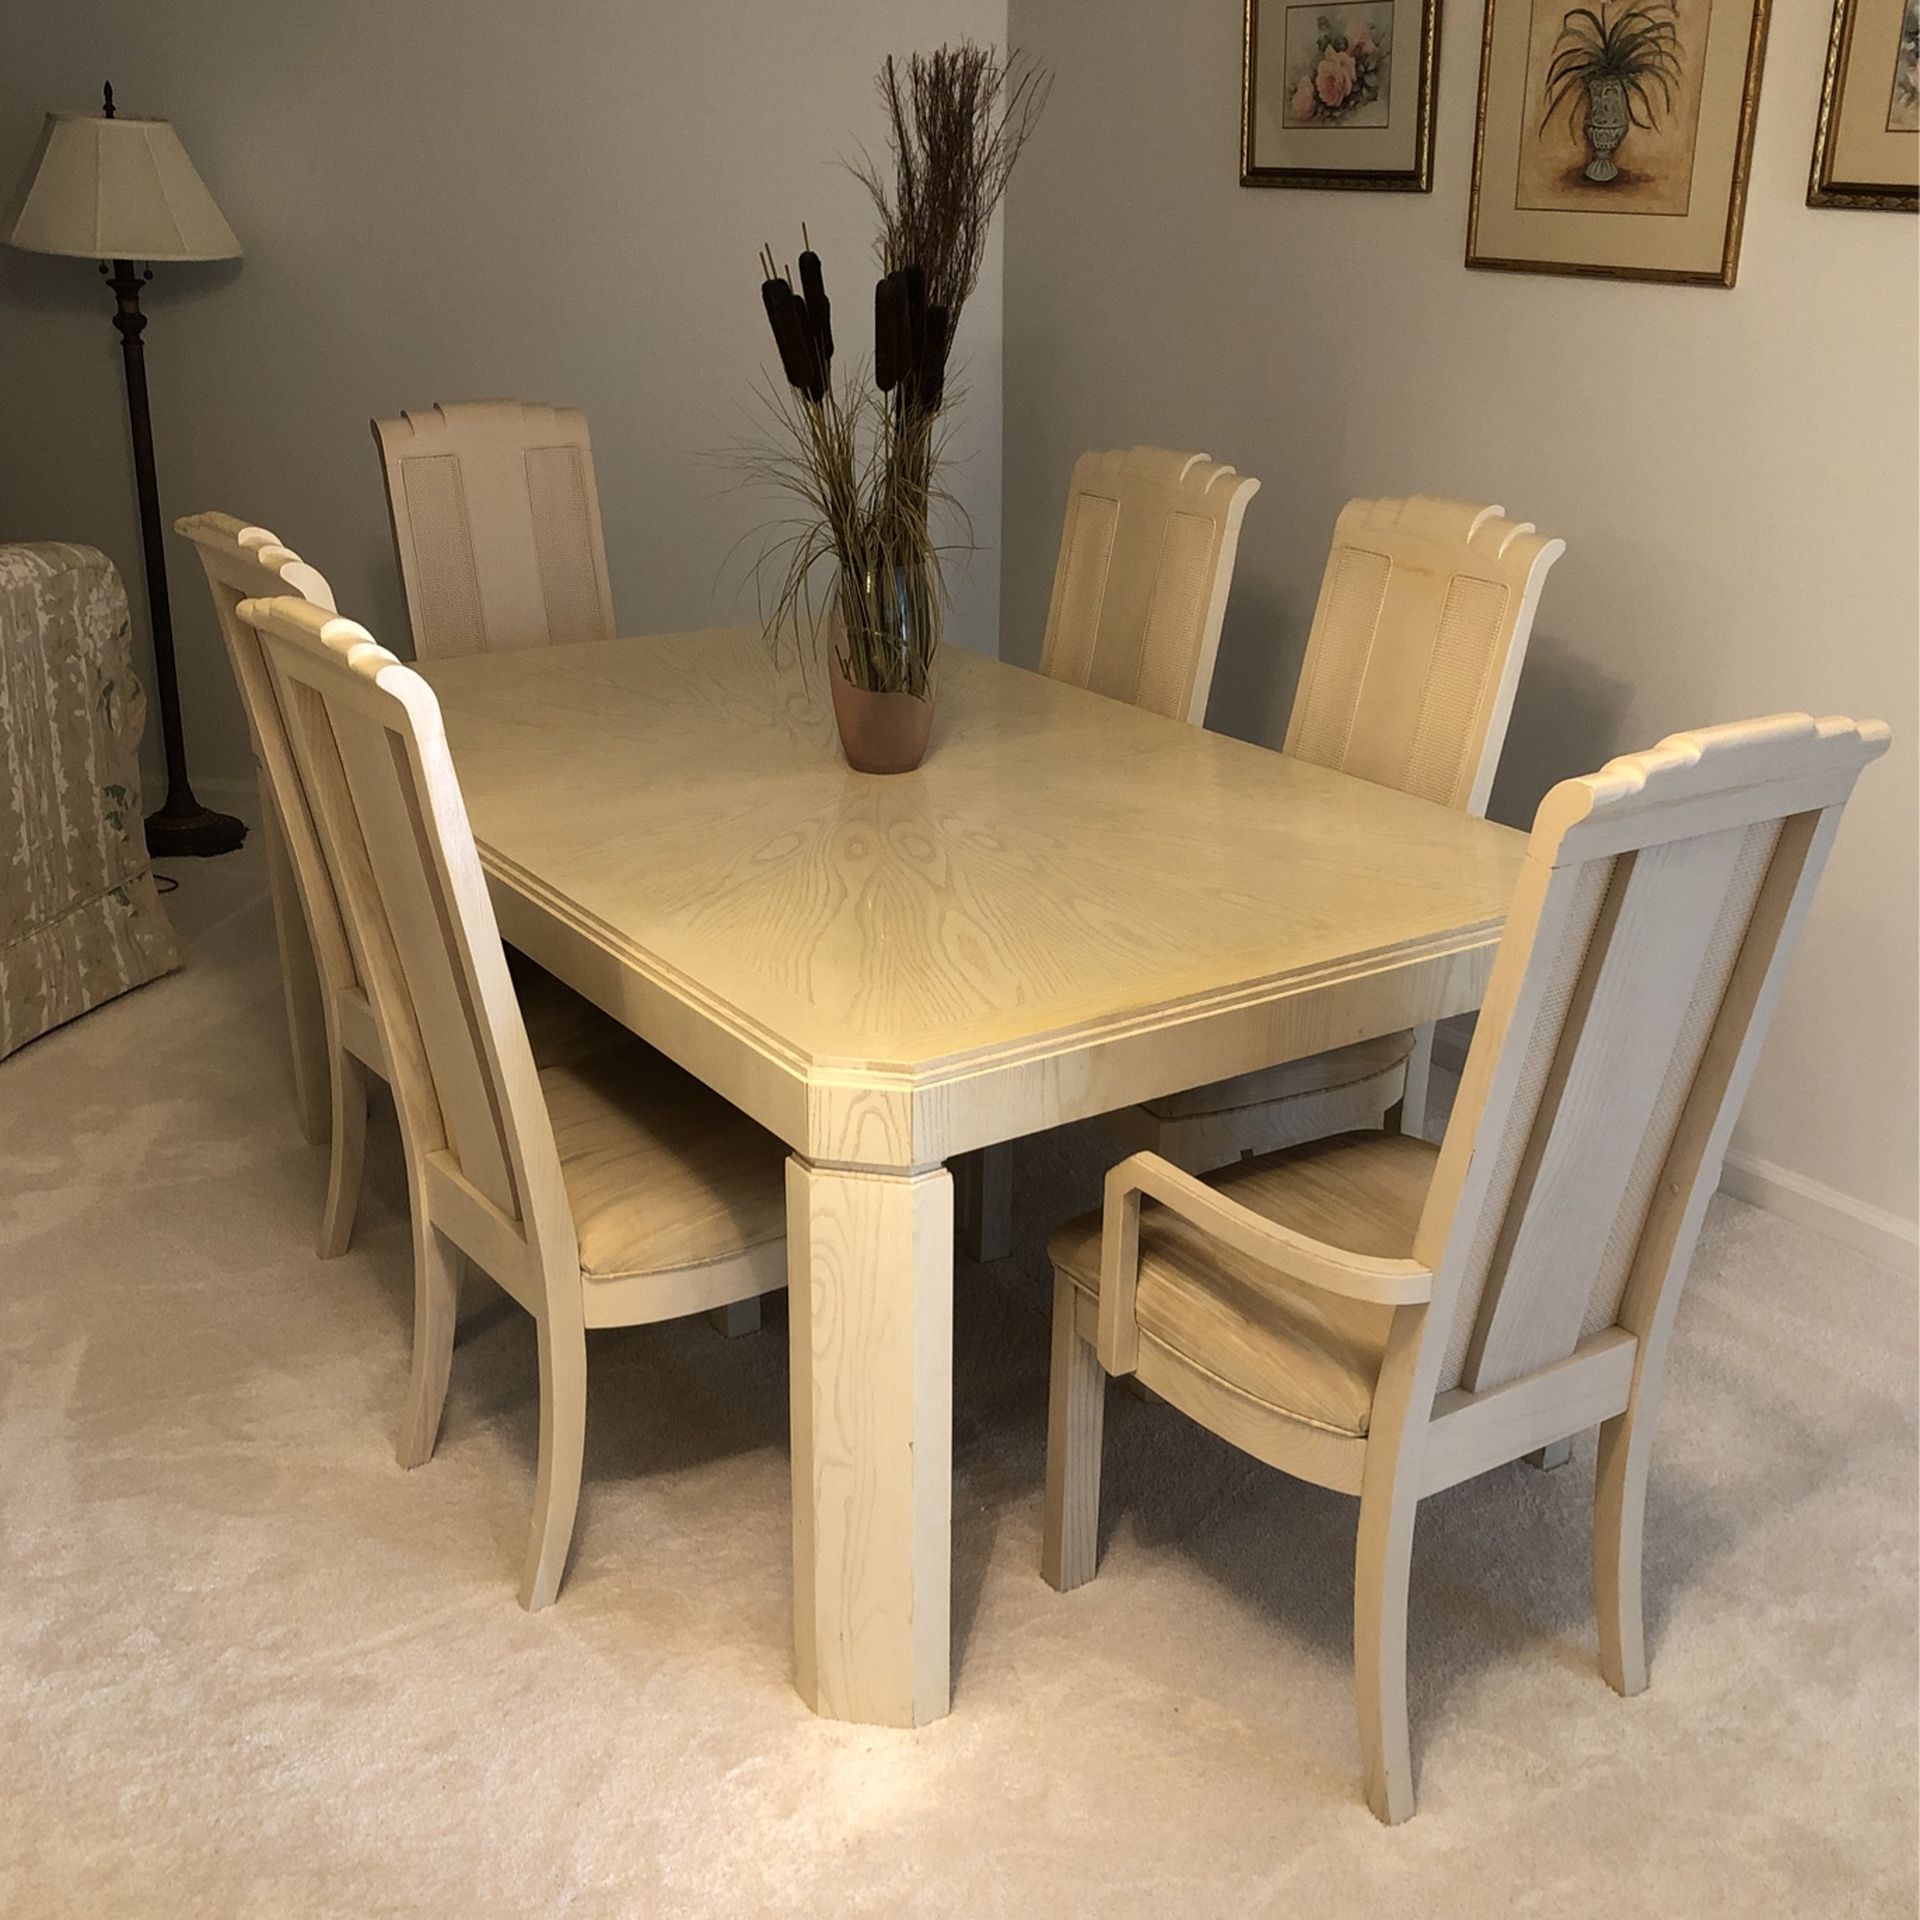 6’ Hardwood Dining Room Table And 6 Chairs 